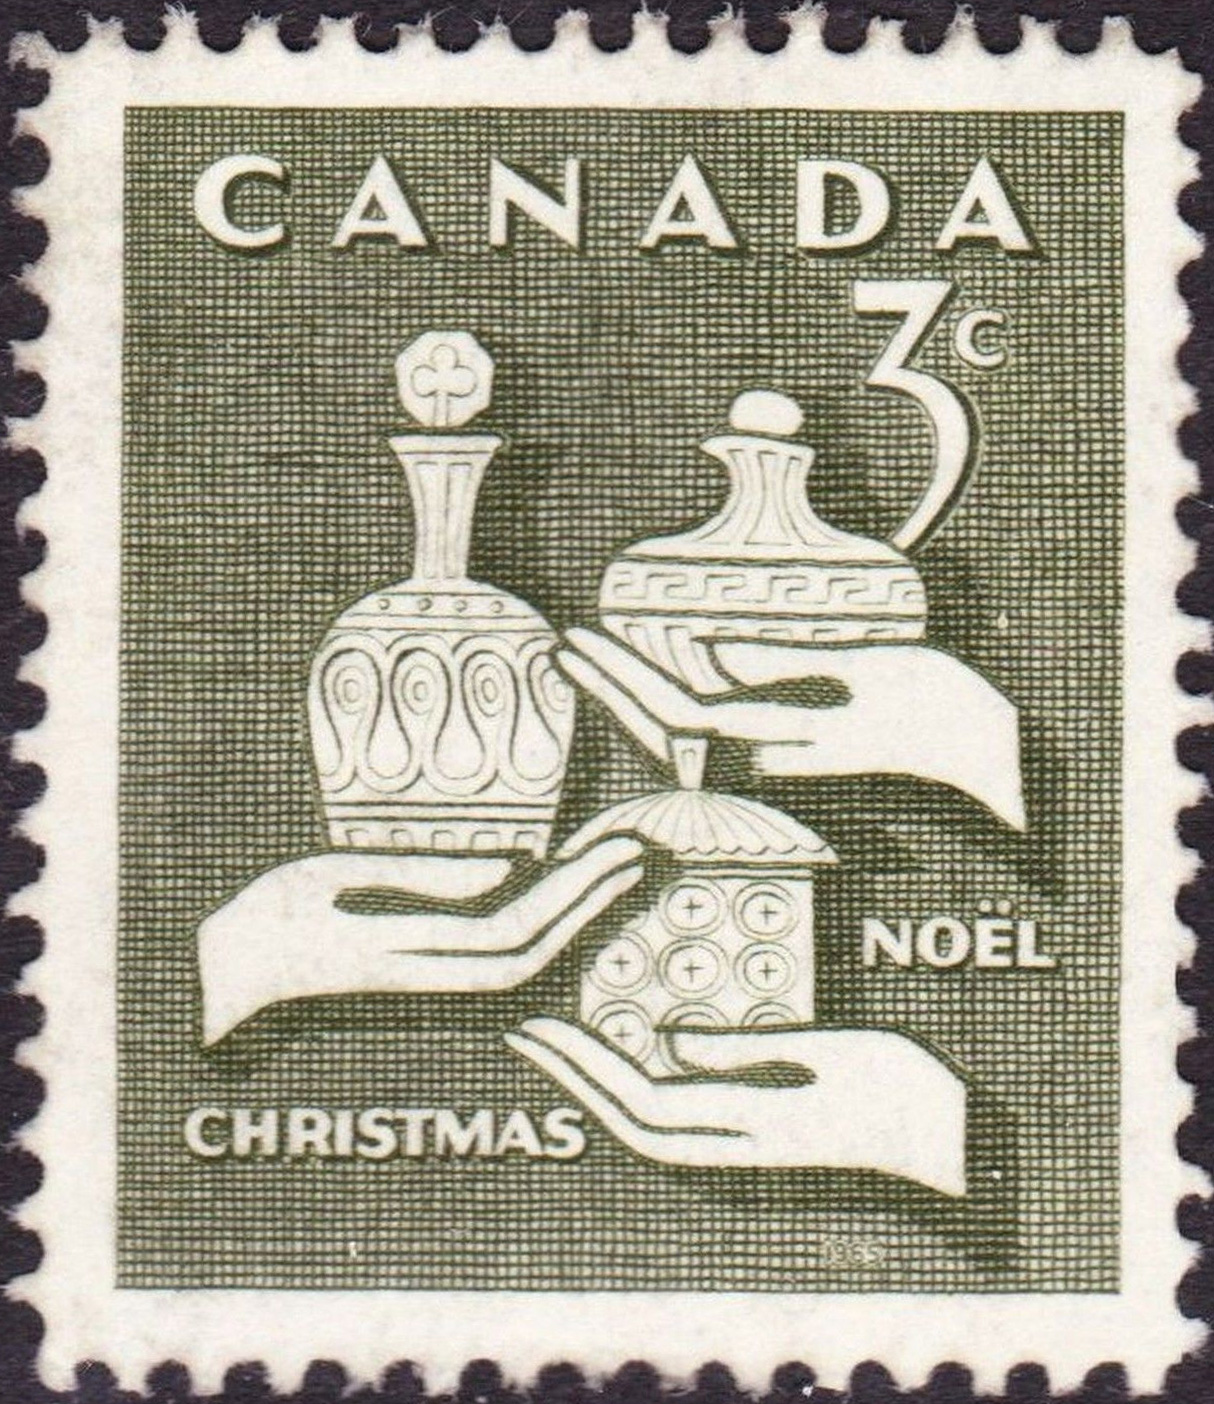 Stampsandcanada Ts Of The Wise Man 3 Cents 1965 Stamps Of Canada Price Guide And Value